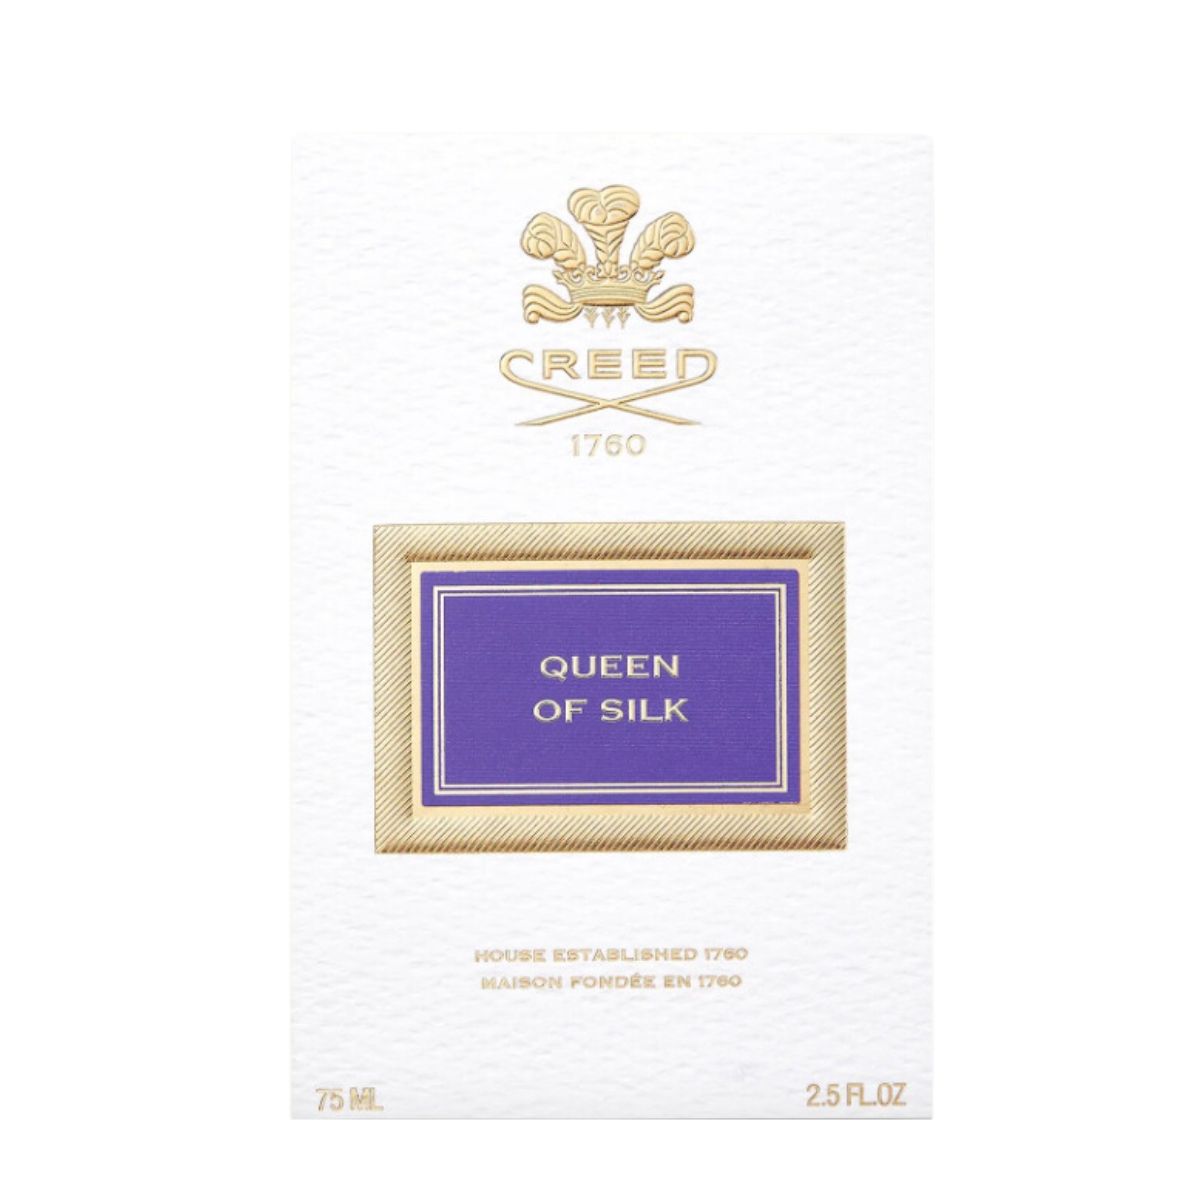 Creed Millesime Queen Of Silk